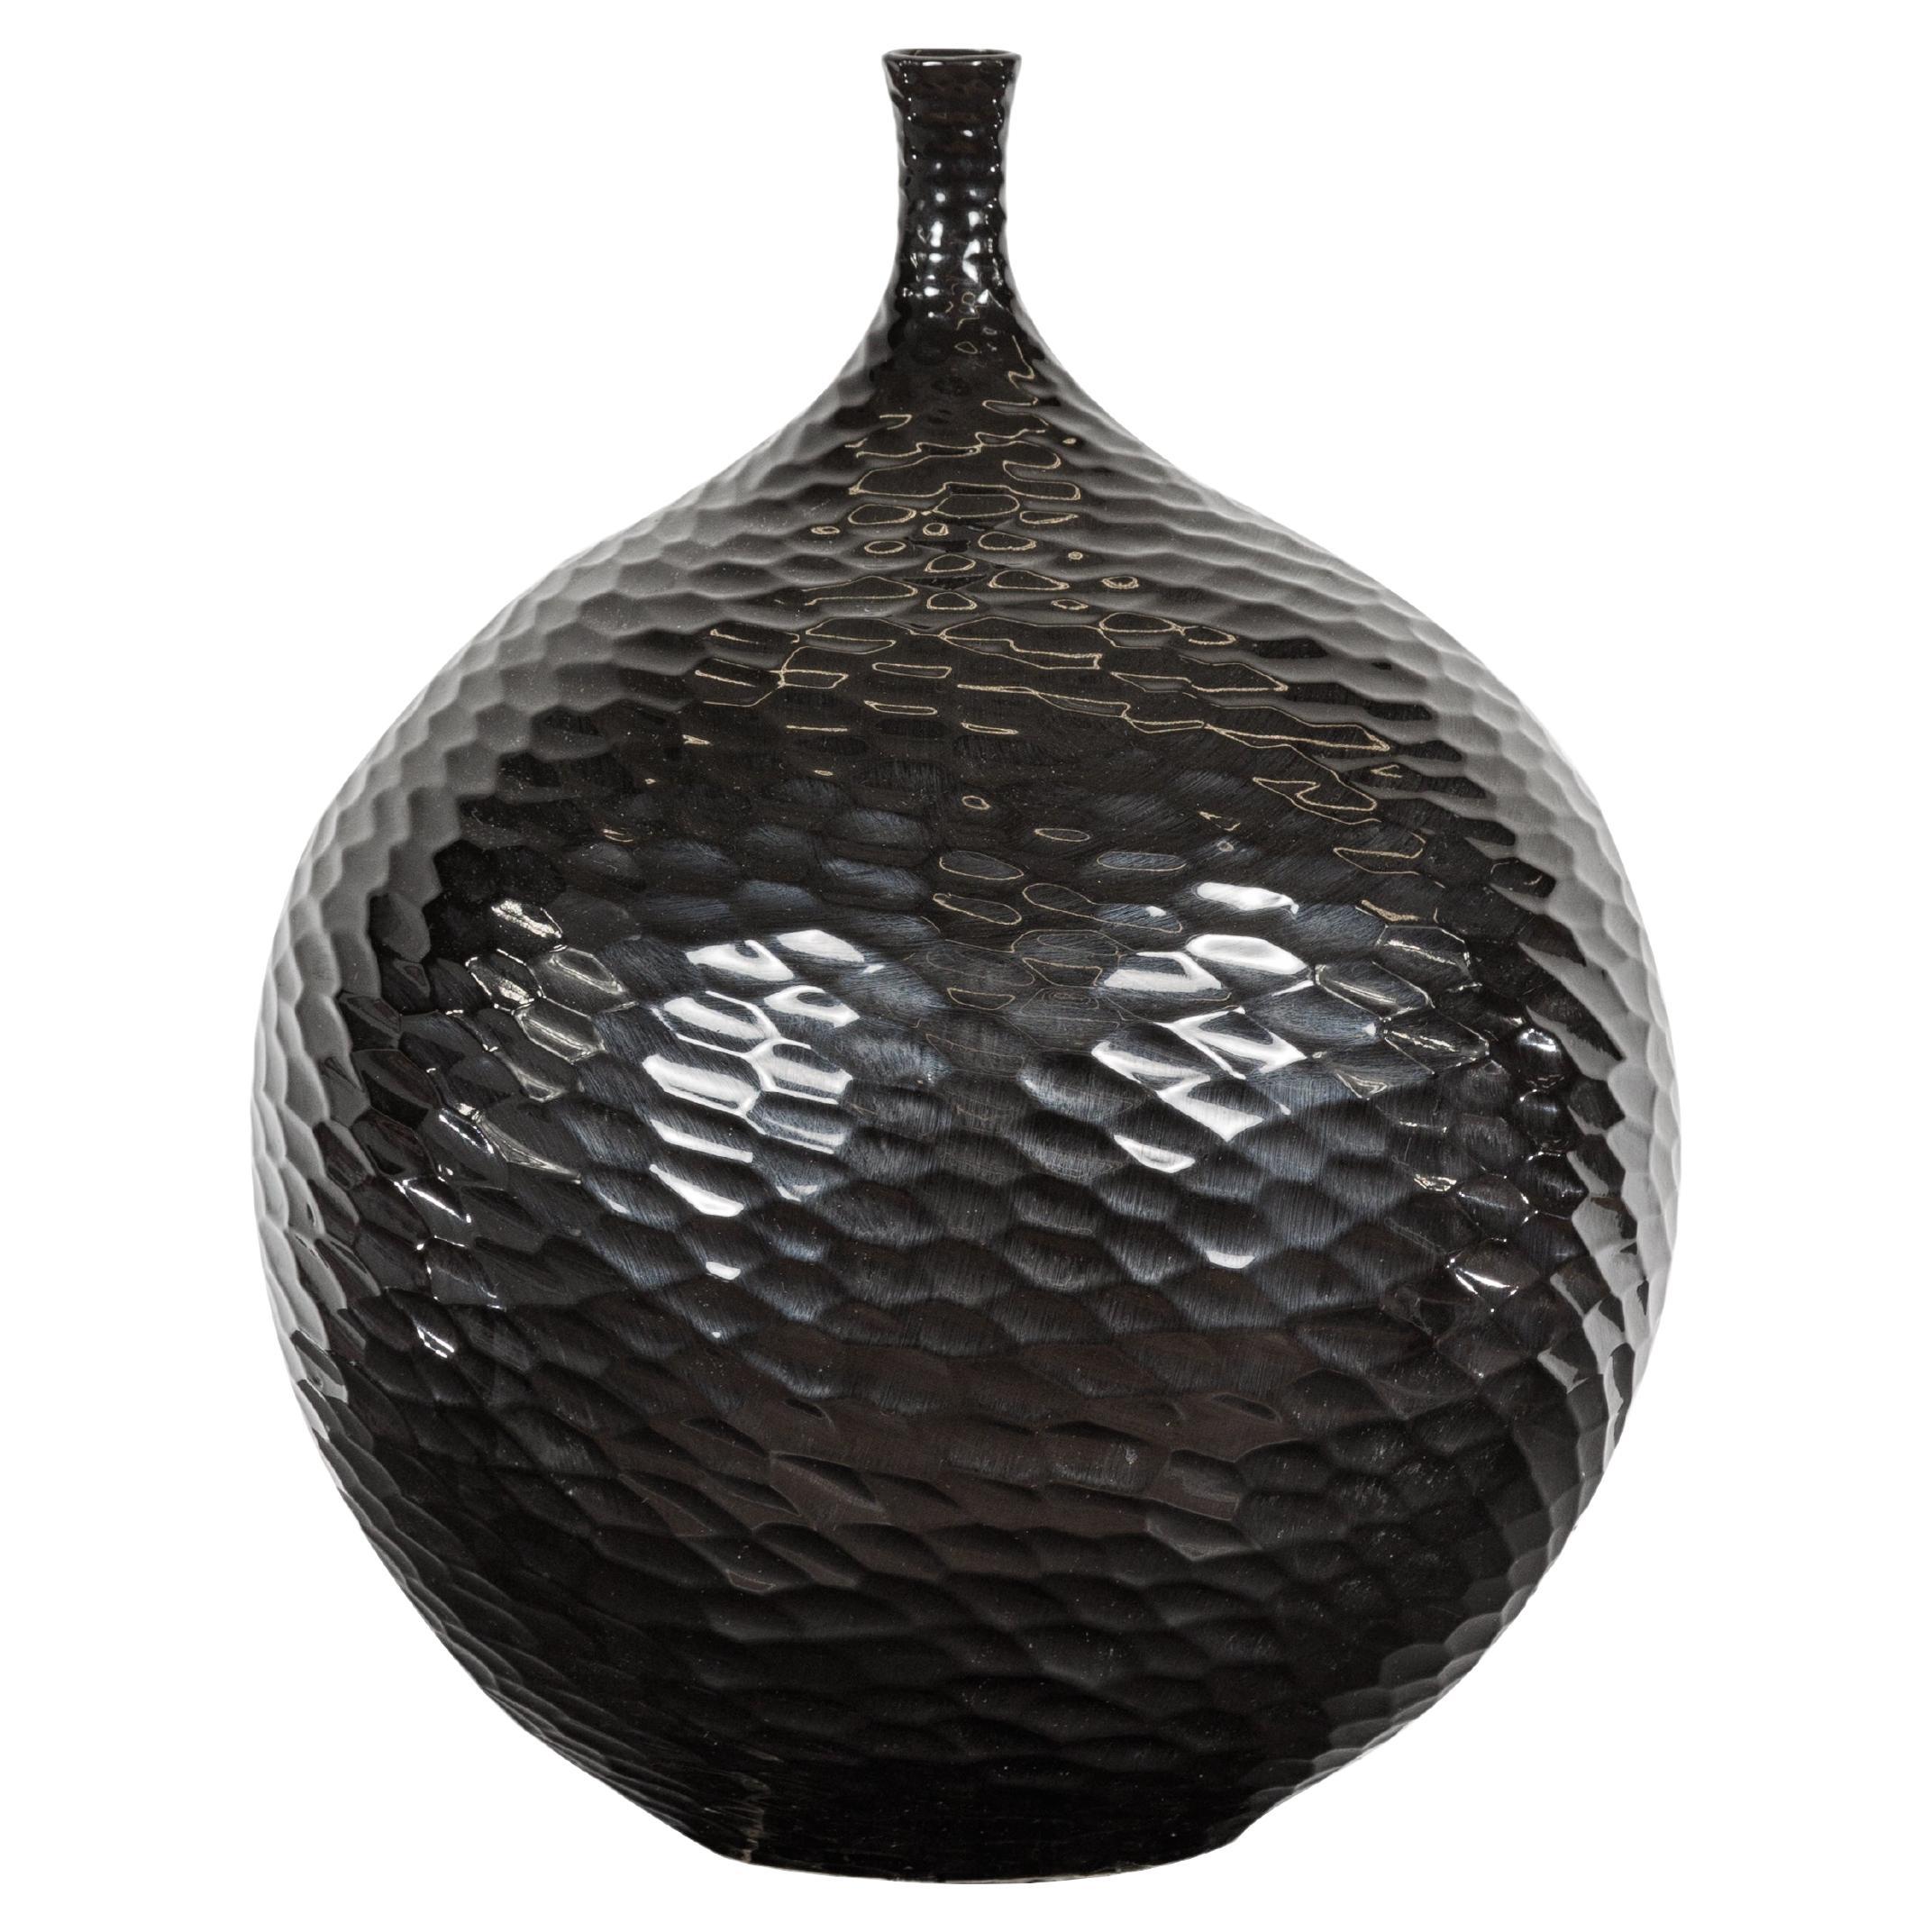 Artisan Black Glazed Bulb Shaped Vase with Honeycomb Patterns and Narrow Mouth For Sale